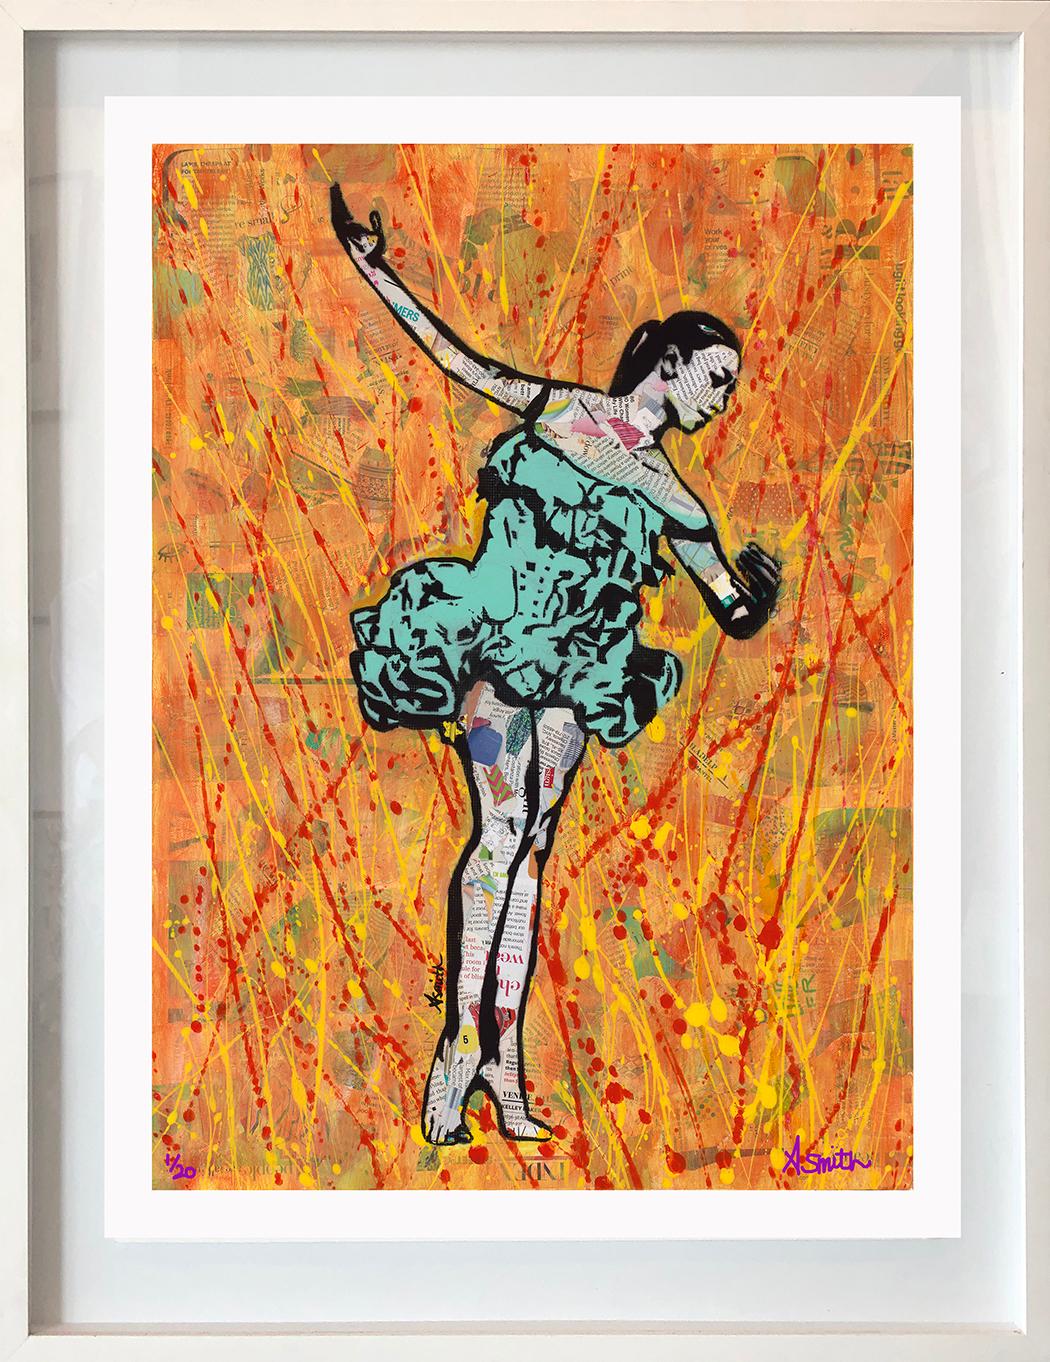 Amy Smith Figurative Painting - Fire Dancer - Framed Contemporary Pop Art Print of Ballet  + Orange and Teal